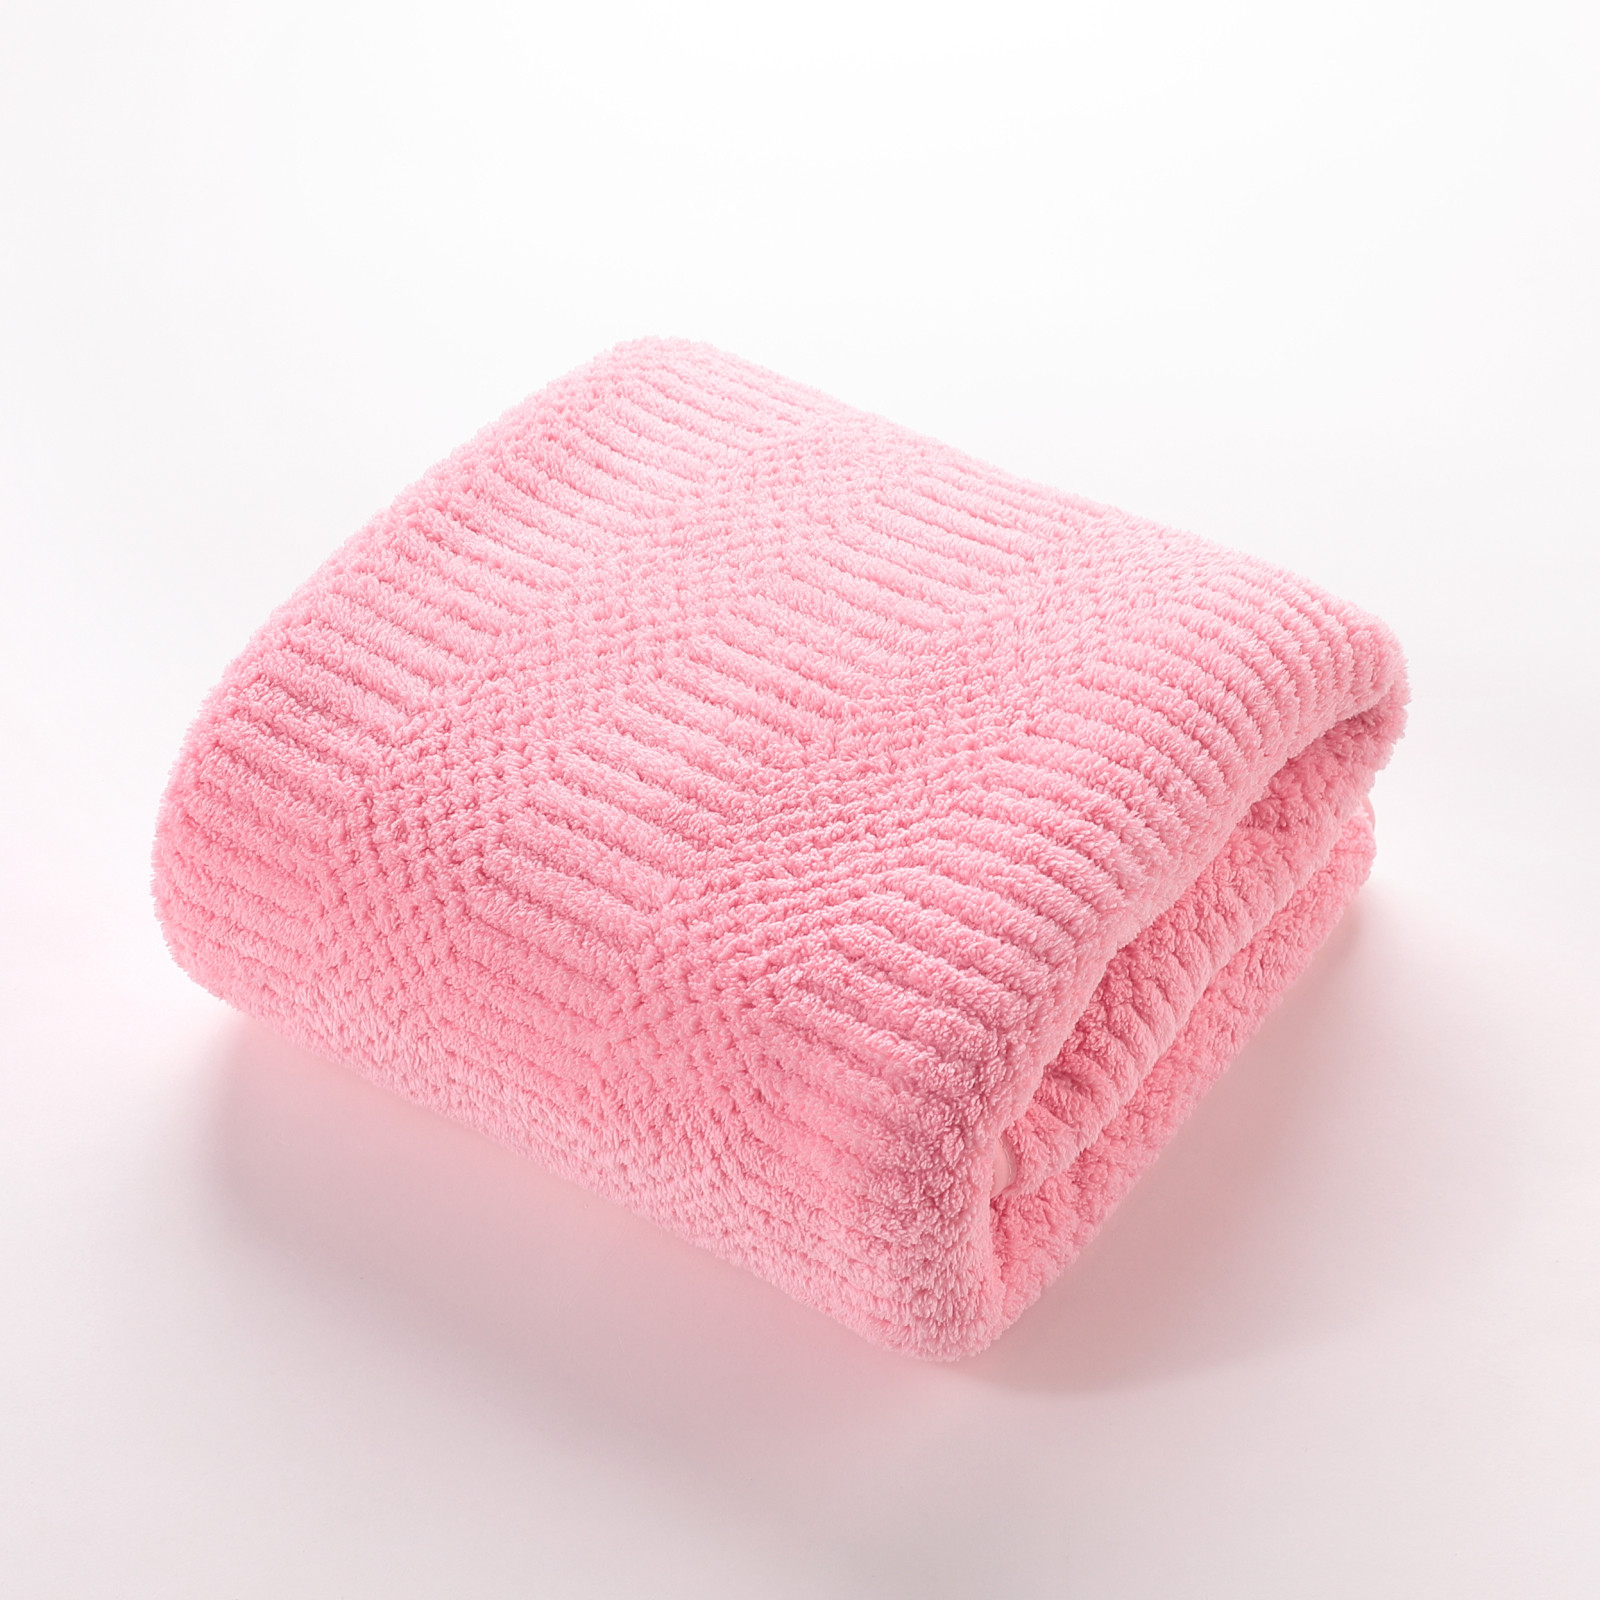 Kuber Industries Bath Towel For Men, Women|280 GSM|Extra Soft & Fade Resistant|Polyester Towels For Bath|Waffle Texture|Bathing Towel, Bath Sheet (Pink)